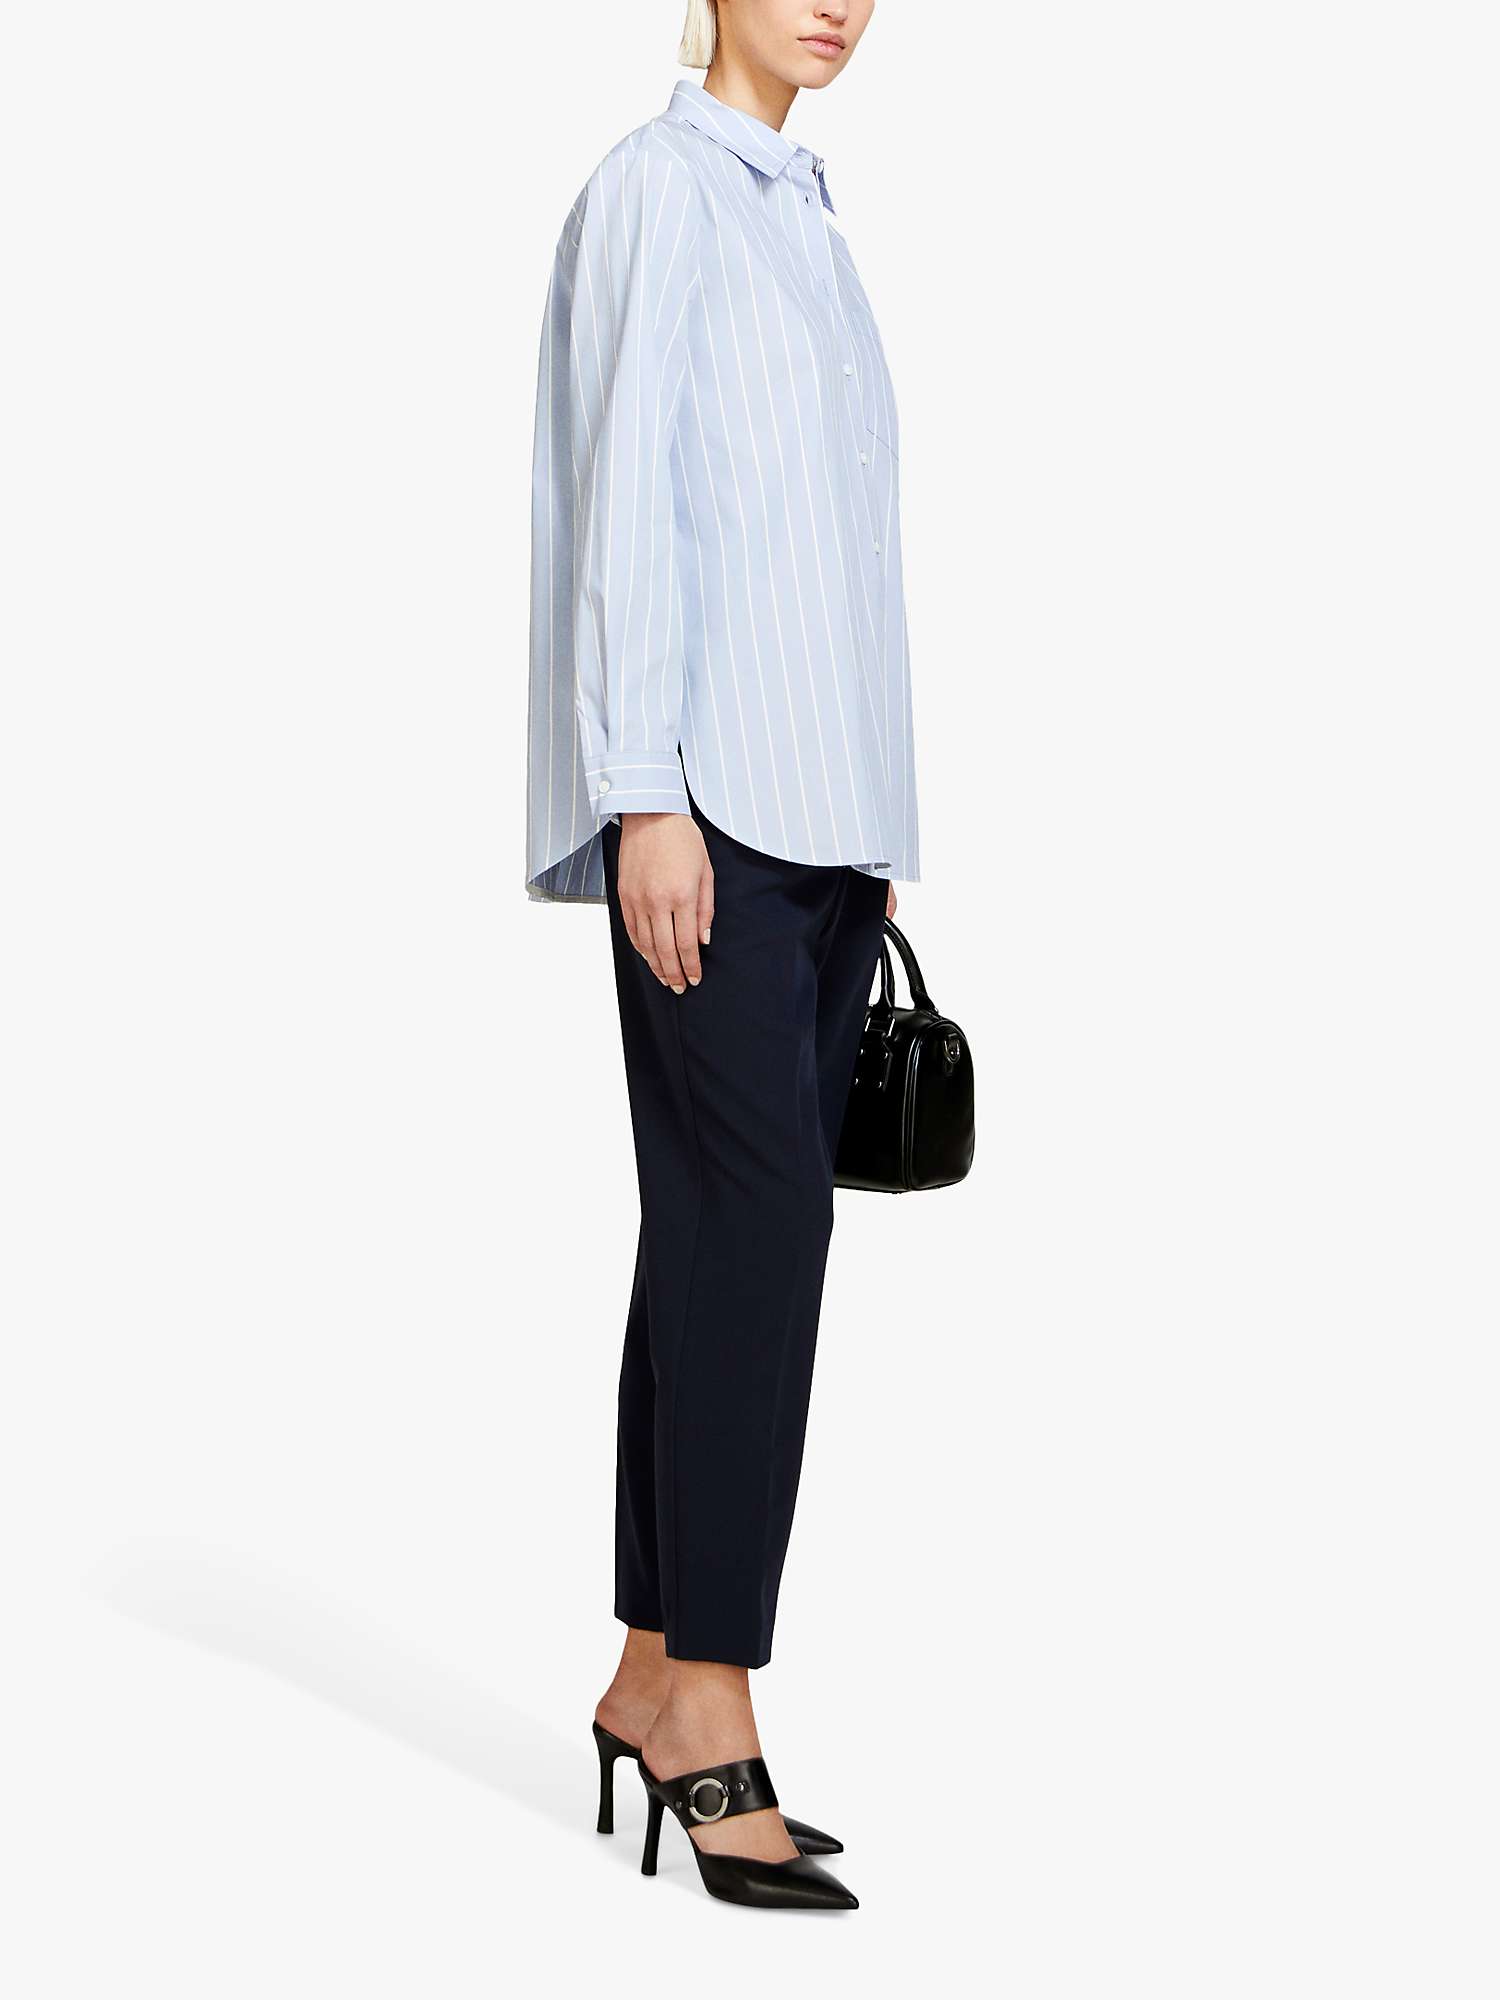 Buy SISLEY Plain Tailored Cropped Trousers Online at johnlewis.com